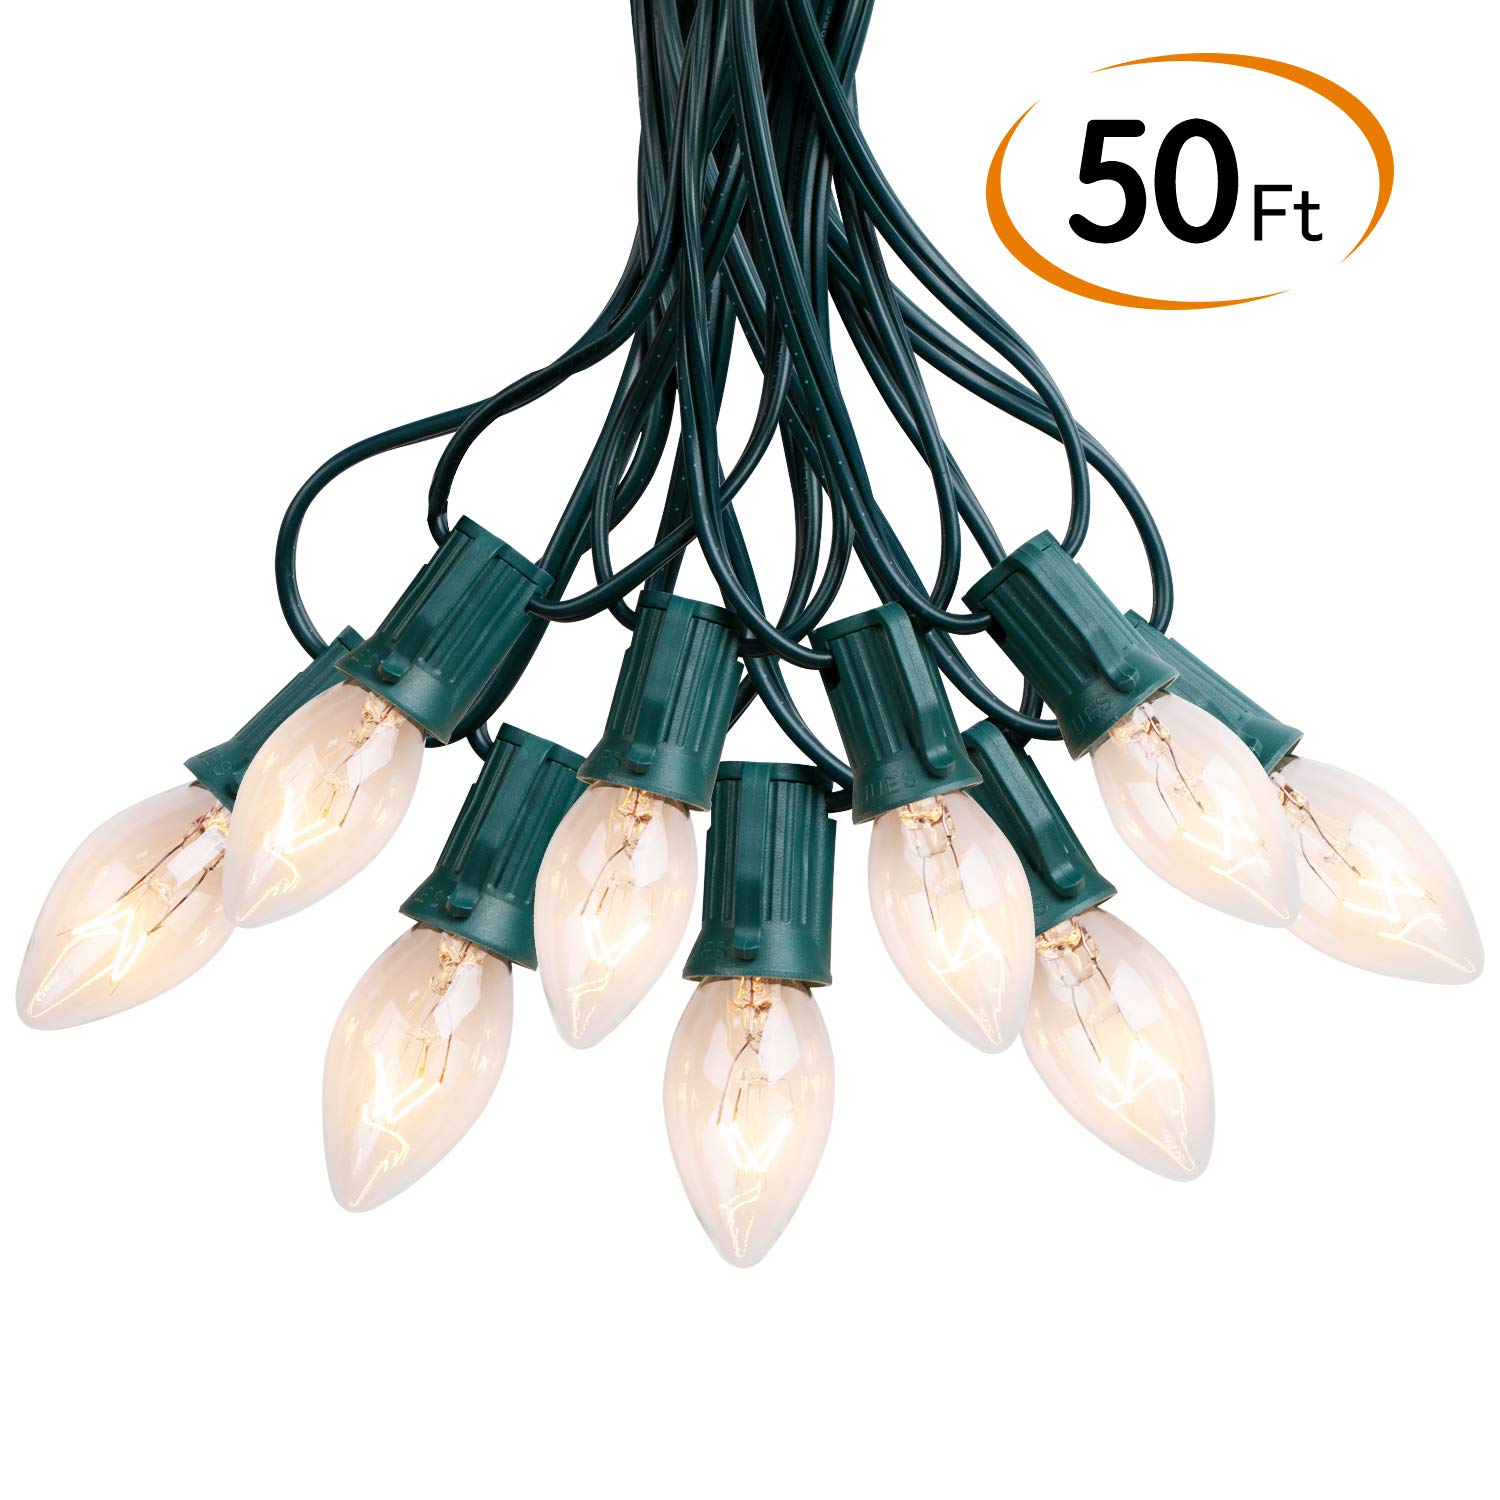 Vintage C9 Christmas Lights Outdoor, 50 FT C9 String Lights for Christmas Decorations Holiday Party Indoor Room Outdoor Roofline Backyard Garden Patio Cafe Home Decoration, E17 Base, 50 +2 Bulbs